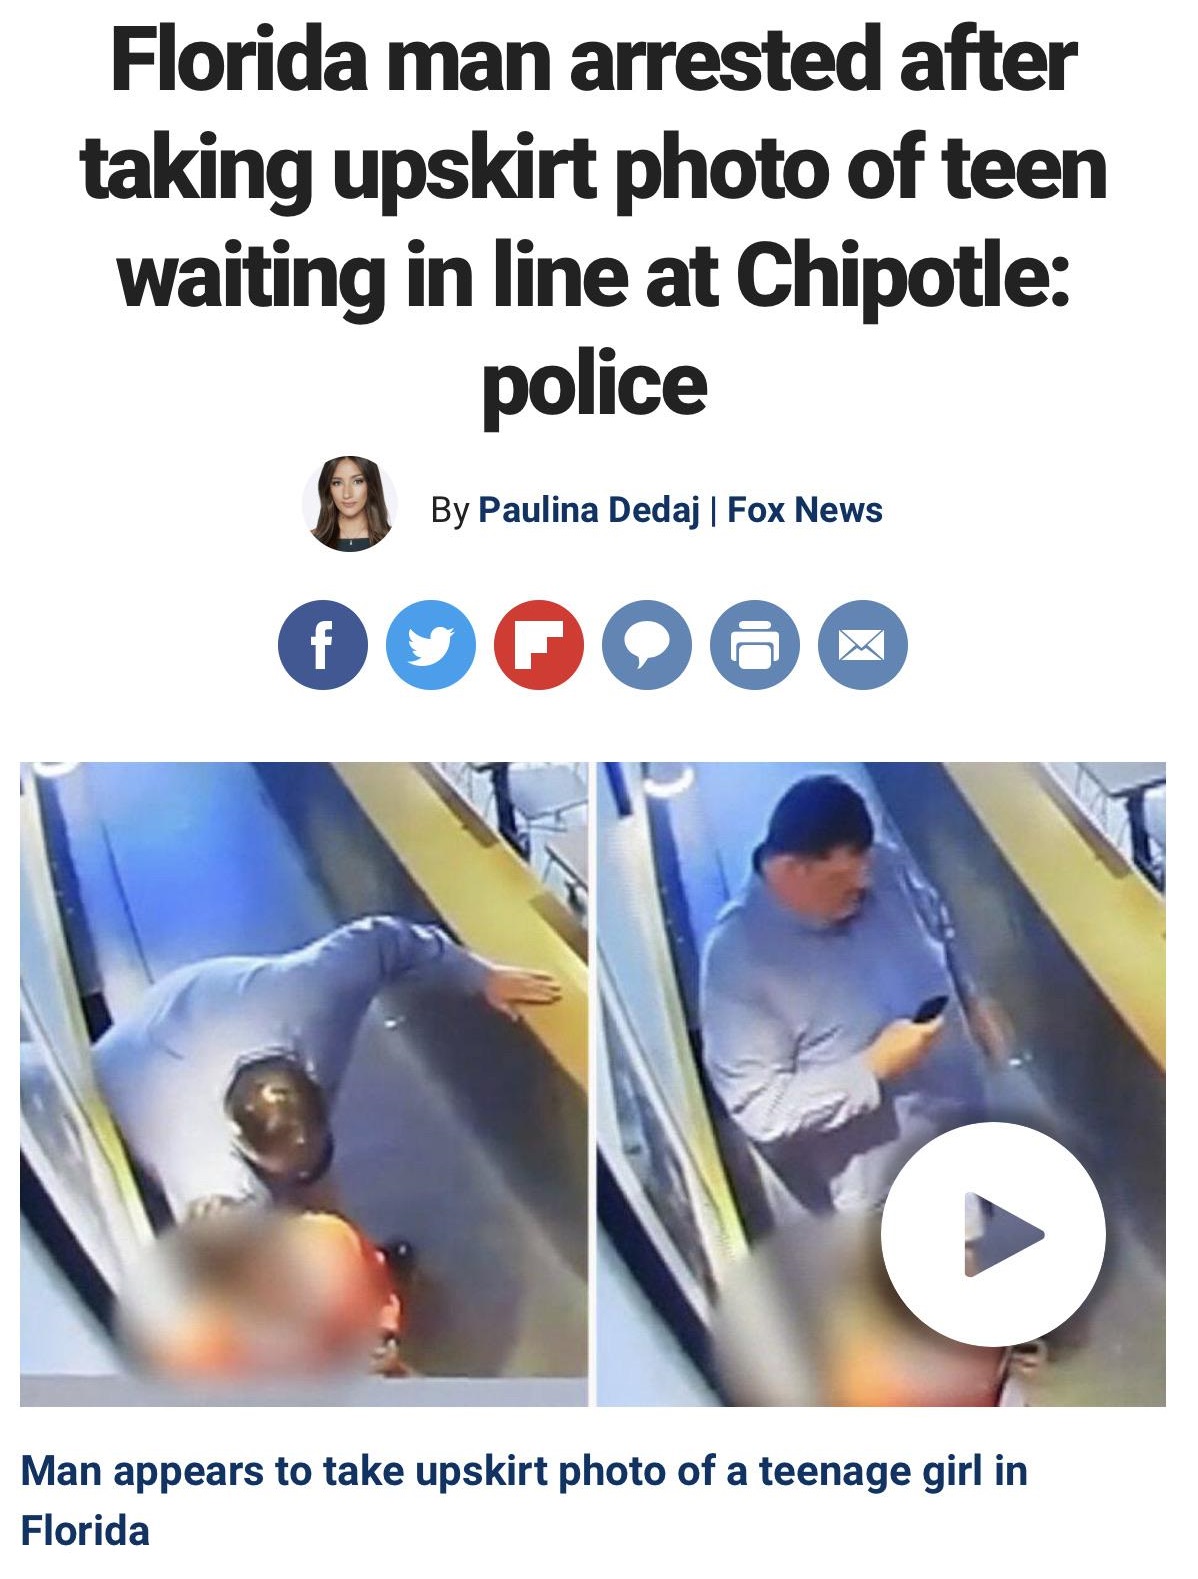 media - Florida man arrested after taking upskirt photo of teen waiting in line at Chipotle police By Paulina Dedaj | Fox News OOM000 Man appears to take upskirt photo of a teenage girl in Florida